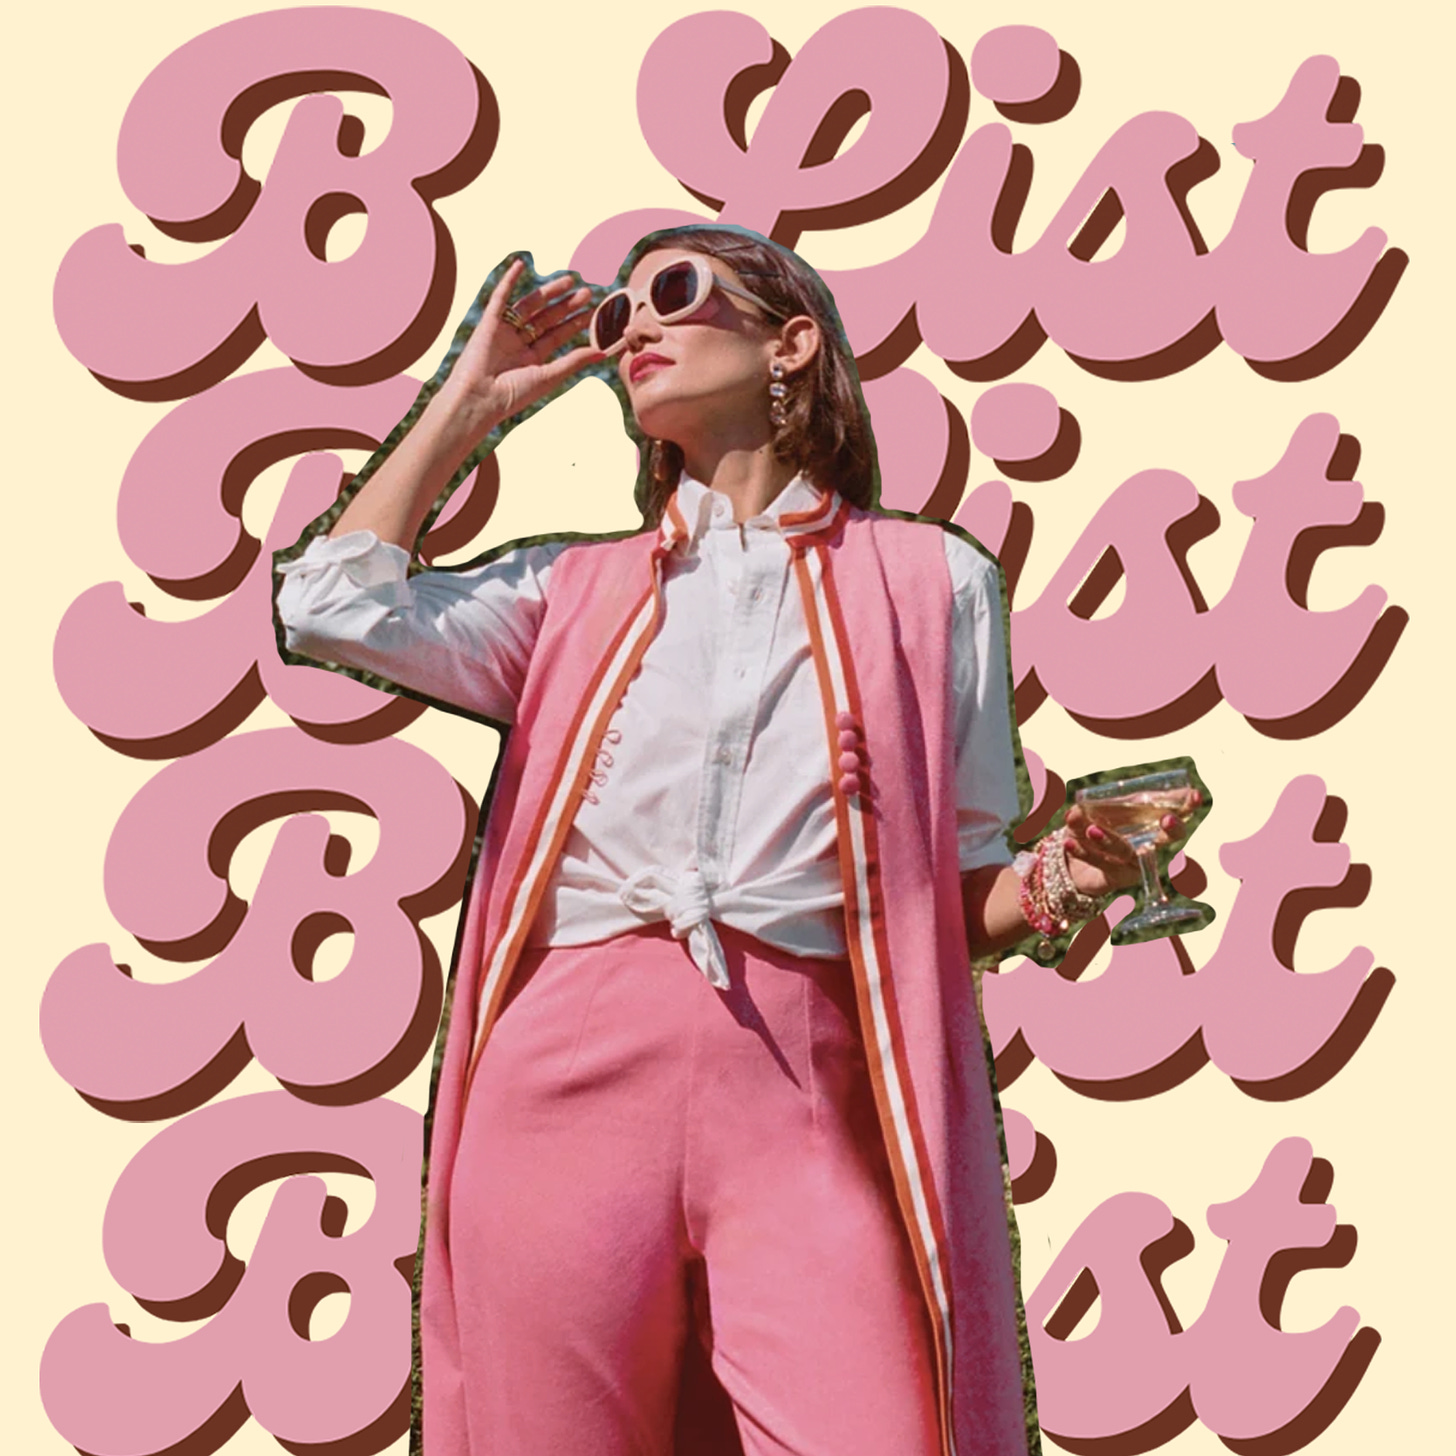 Image of a woman in pink holding a martini